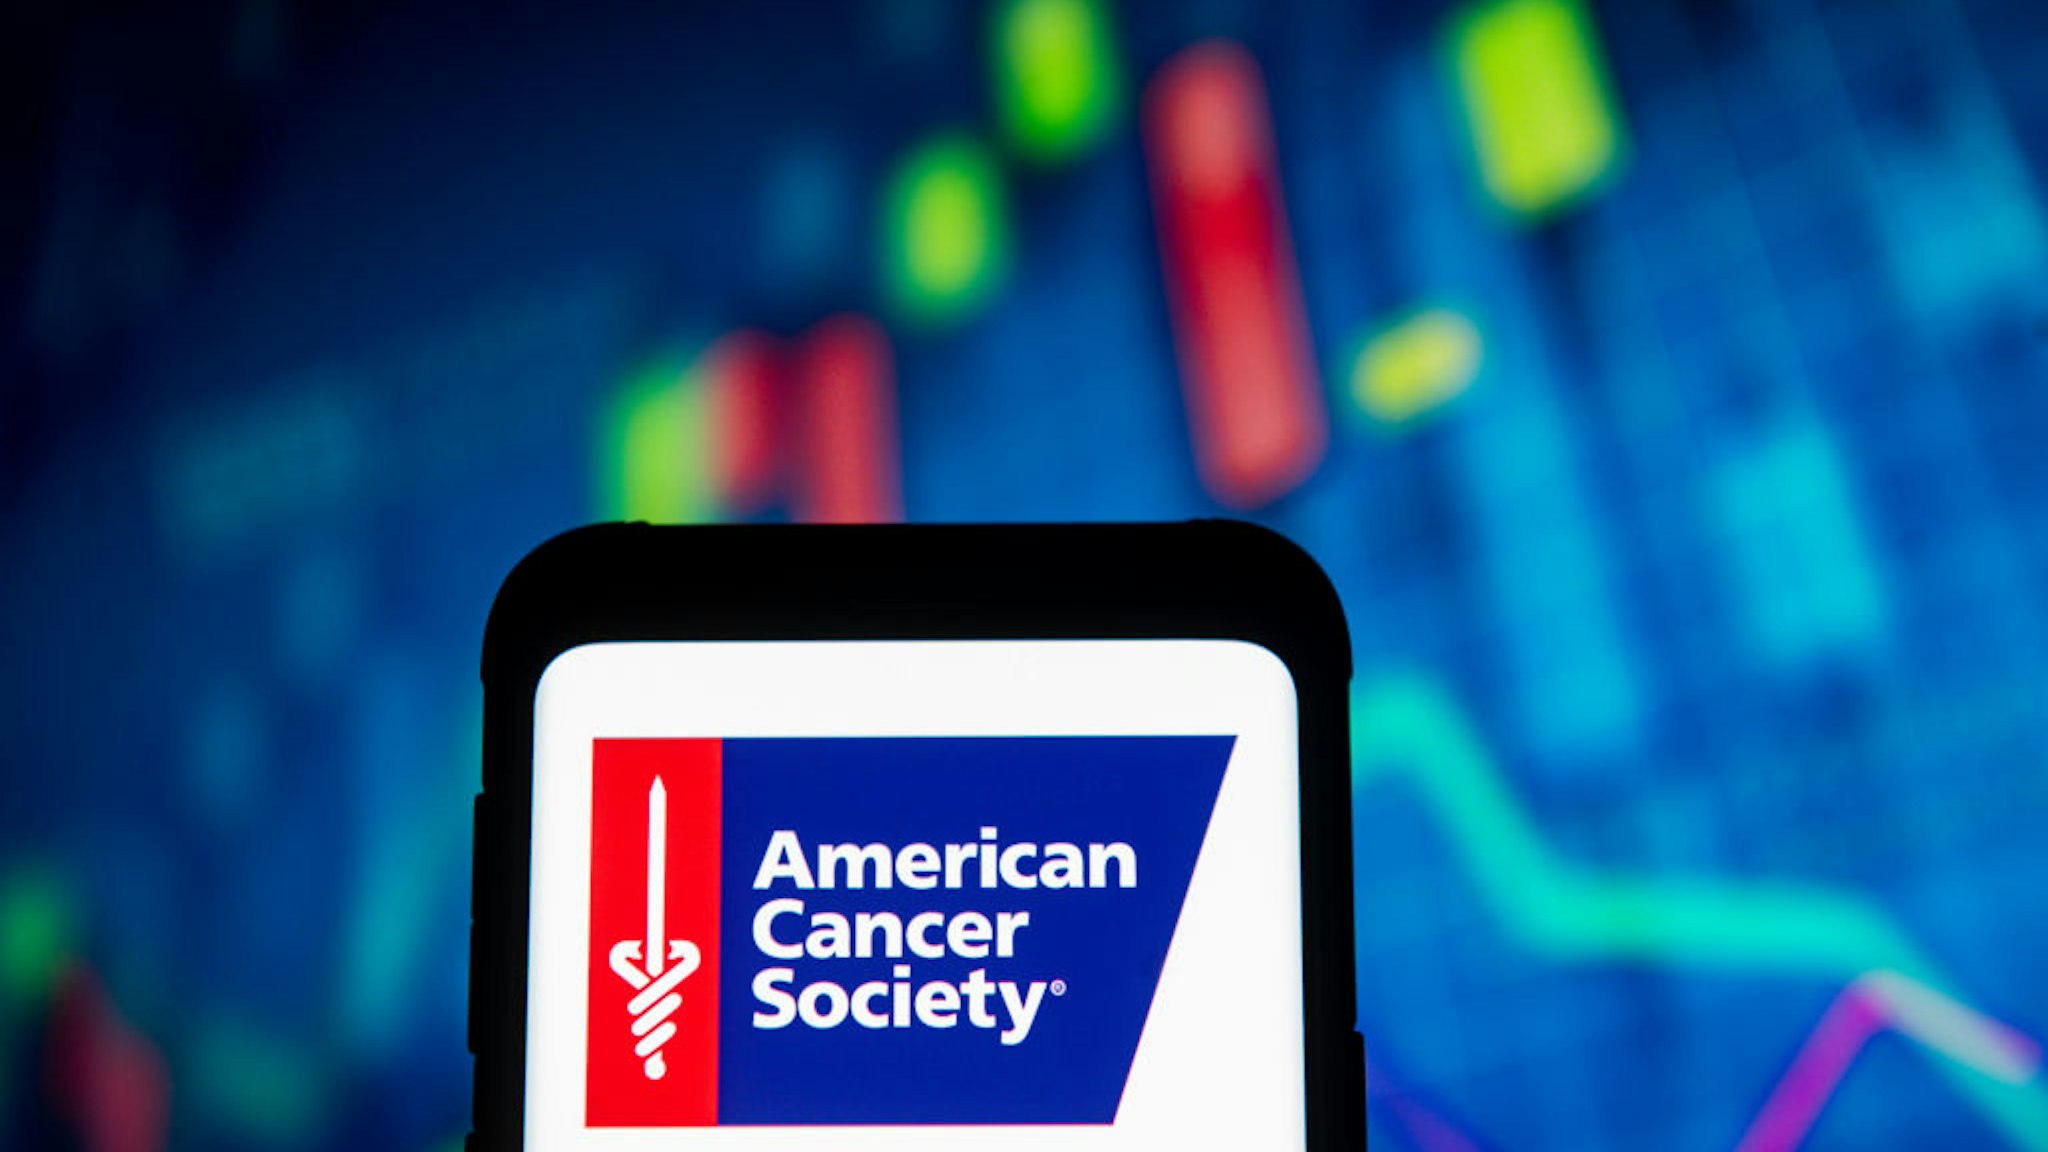 photo illustration an American Cancer Society logo seen displayed on a smartphone.